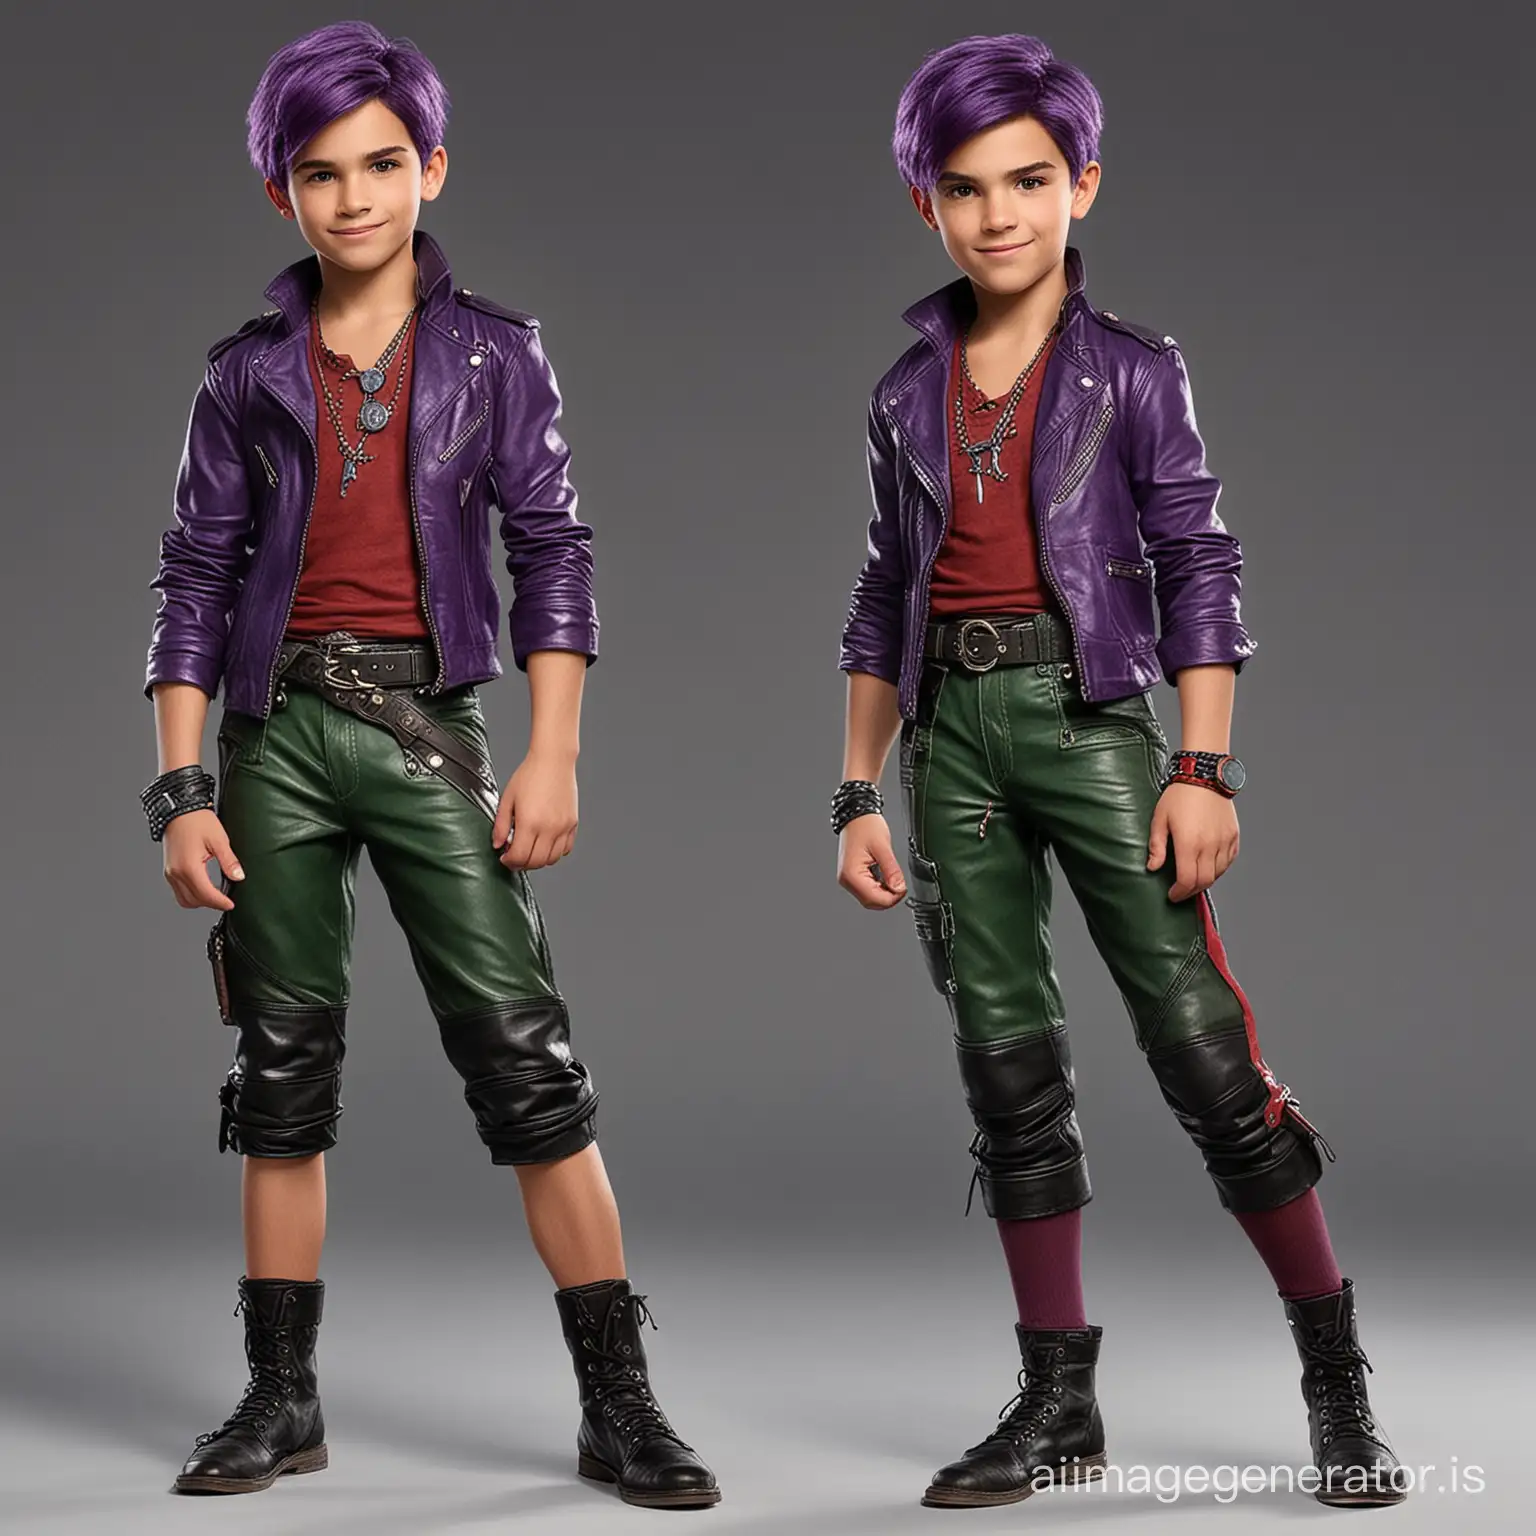 Create a strong, fit 8 year old boy with abs, short purple hair similar to Mal's from the Disney movies Descendants, Isle of the Lost, purple, green and red leather outfit similar to Mal's from Descendants, shorts, Mal's younger brother by a year, there should be a resemblance 